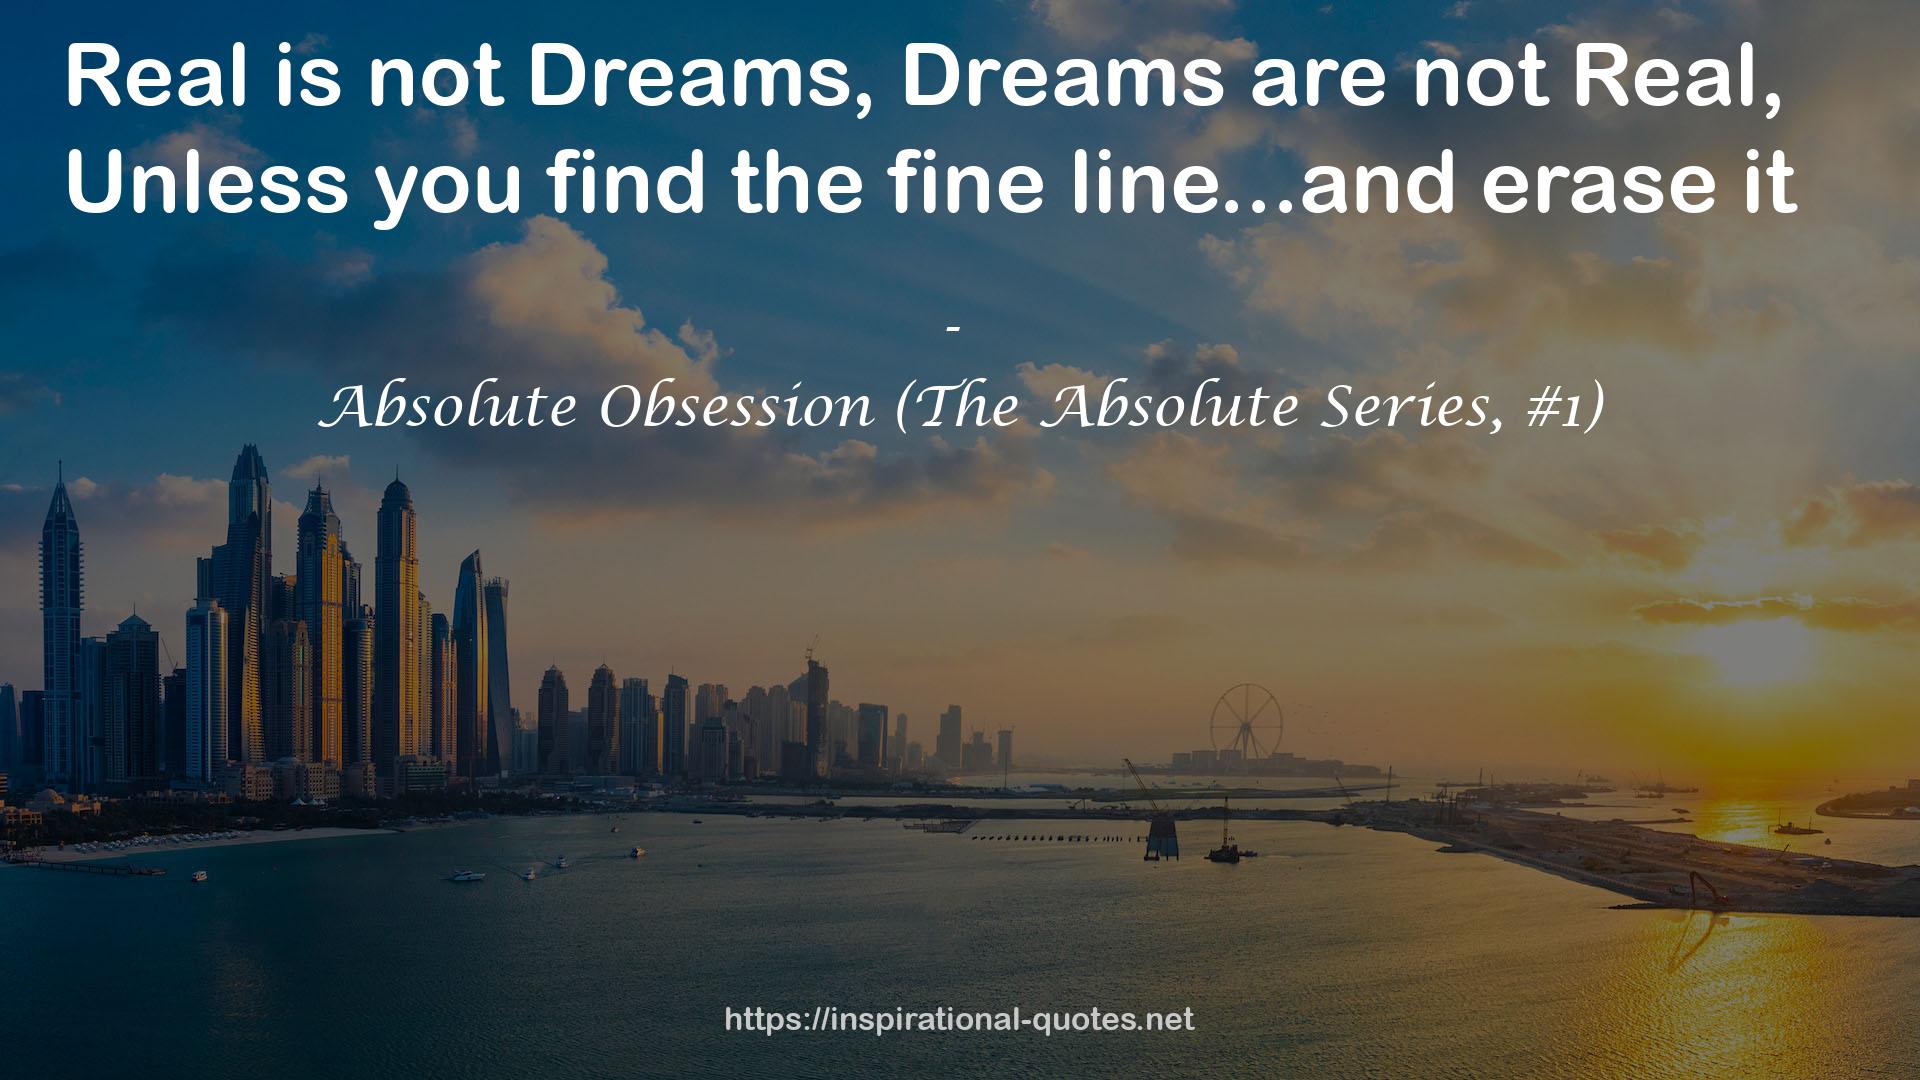 Absolute Obsession (The Absolute Series, #1) QUOTES